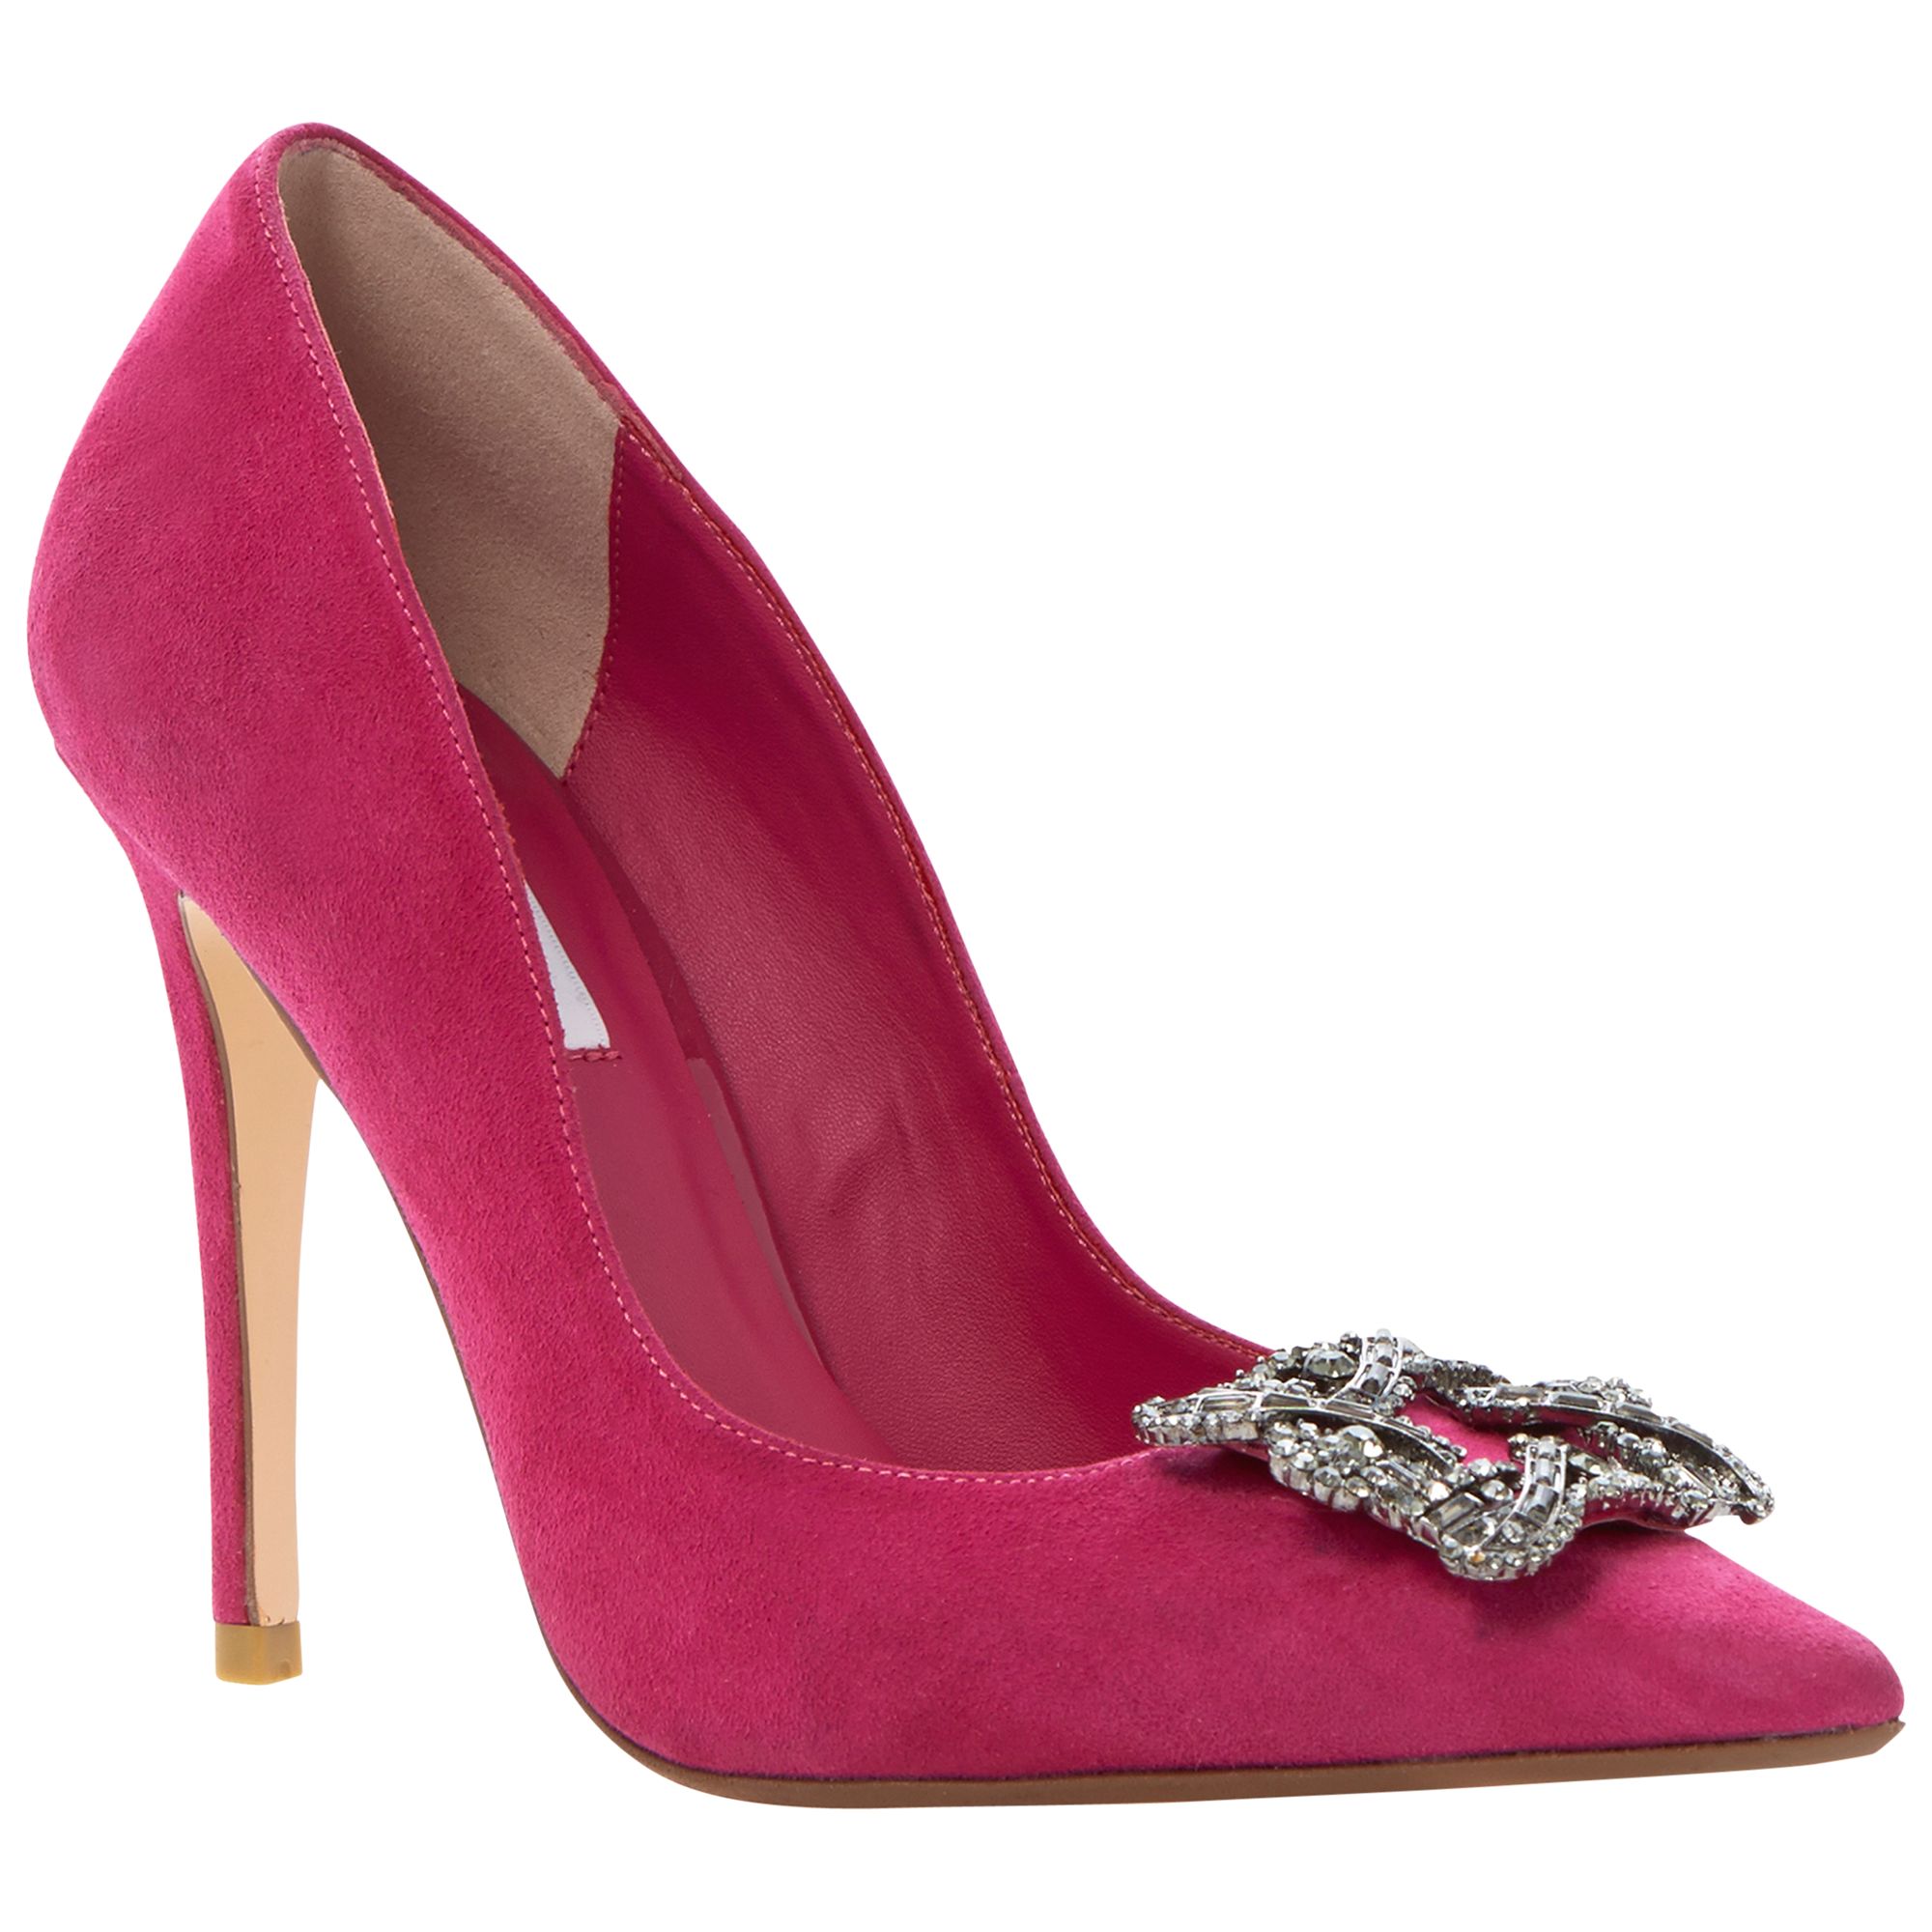 Dune Breanna Jewelled Brooch Court Shoes at John Lewis & Partners